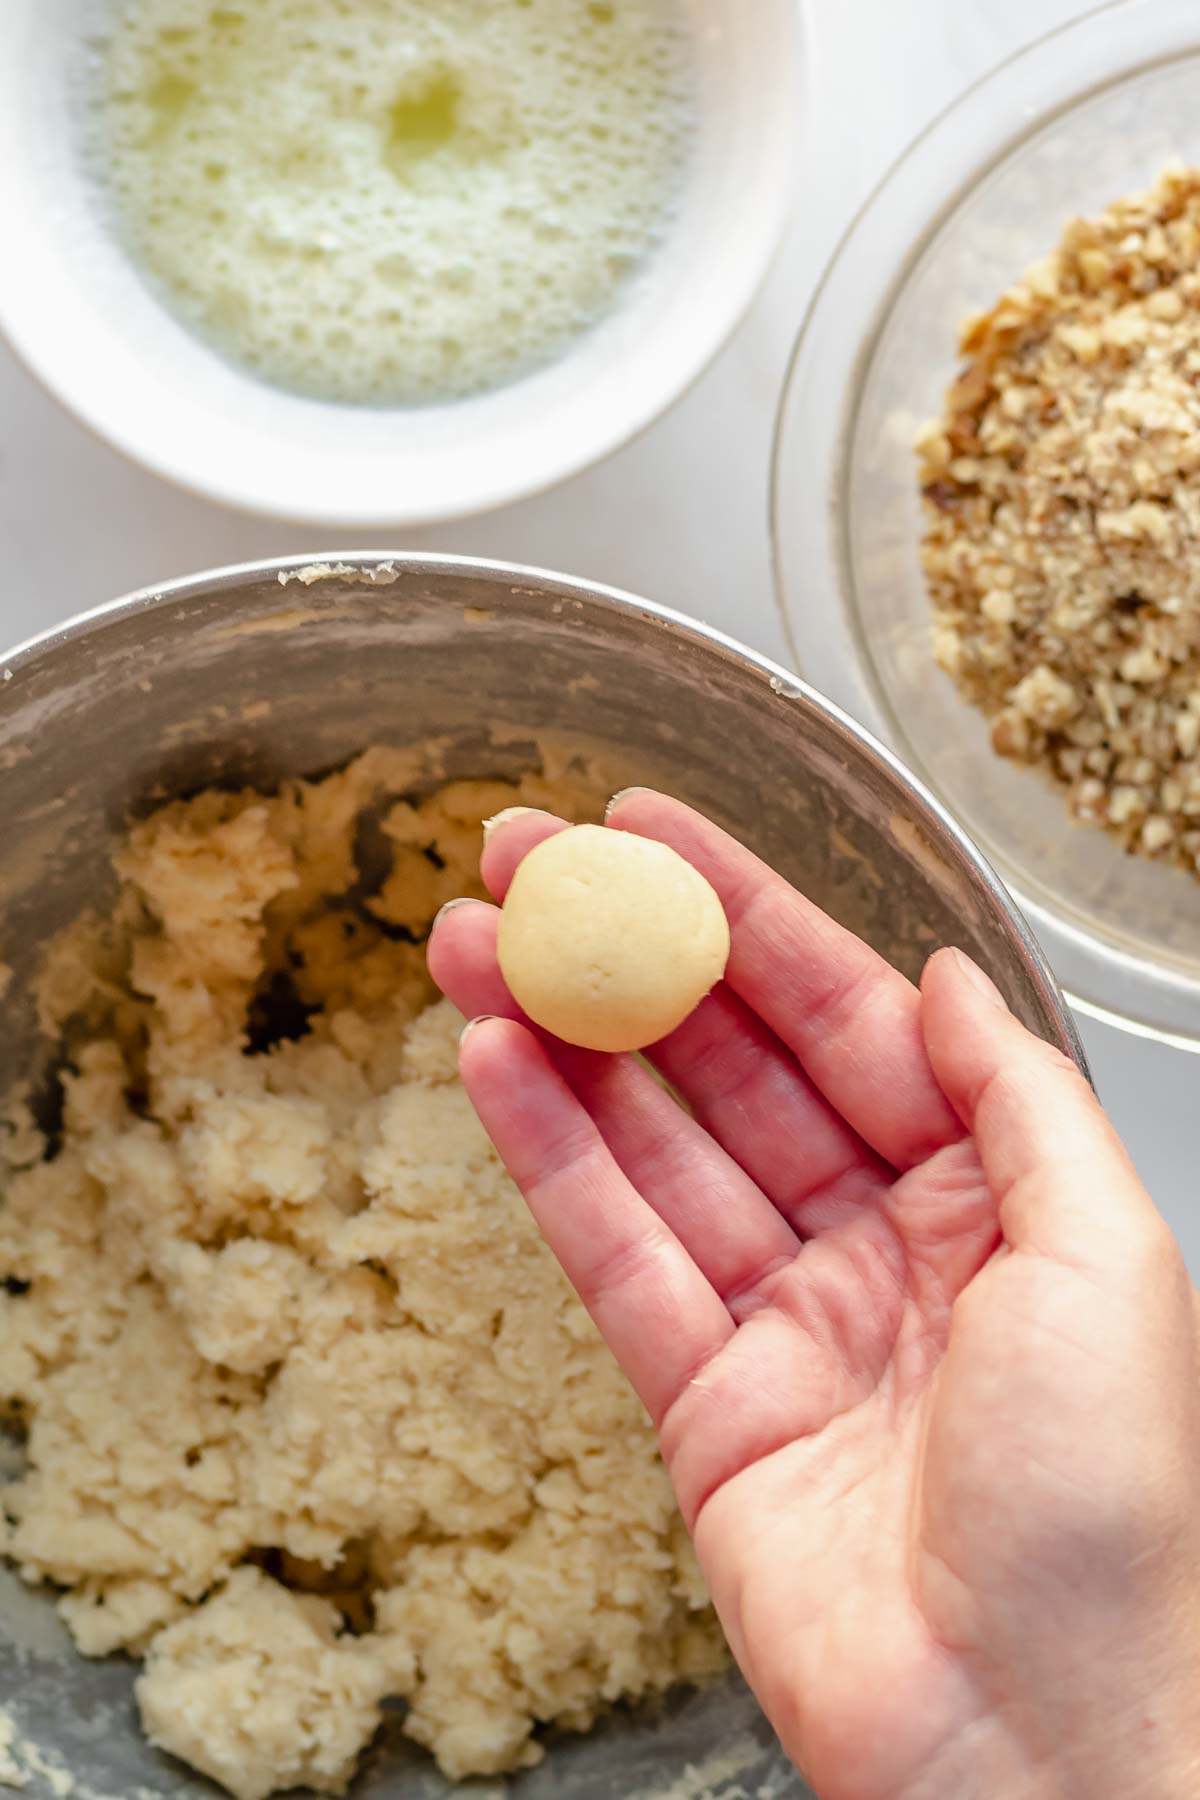 A rolled cookie dough ball in a hand.